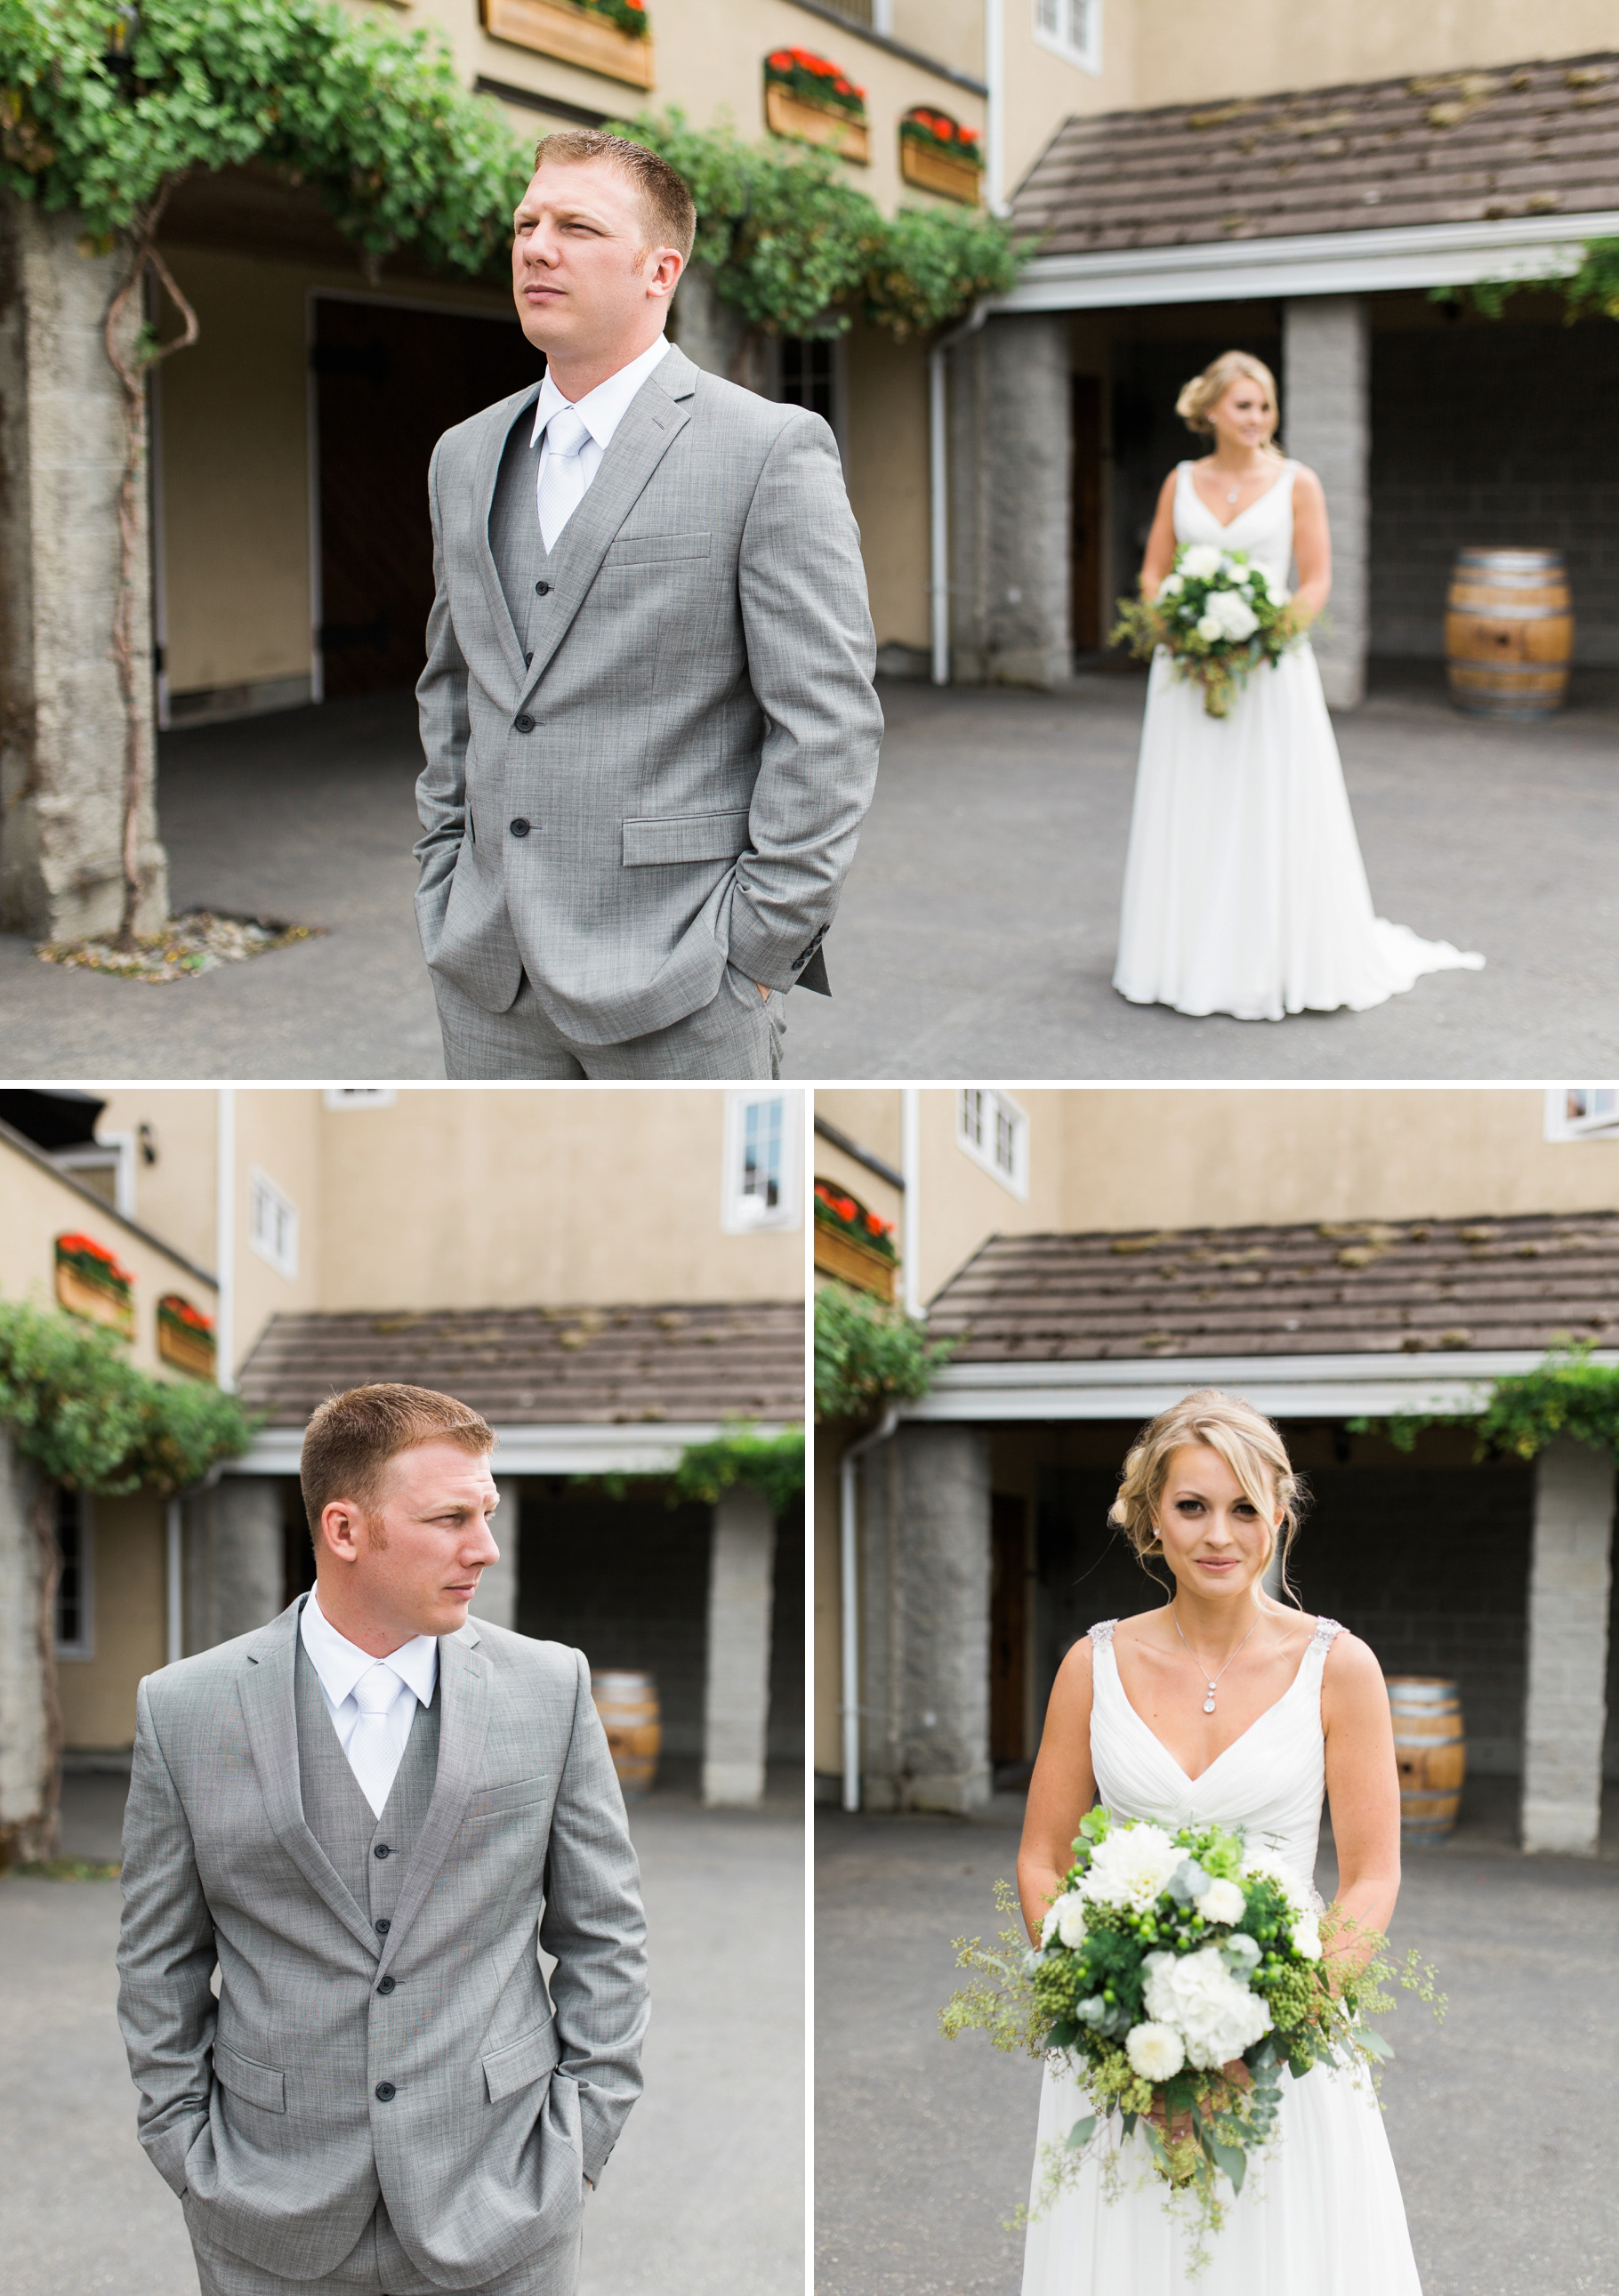 9-Delille-Cellars-Chateau-First-Look-Bride-Groom-Wedding-Photography-by-Betty-Elaine-Woodinville-Winery-Seattle-Photographer